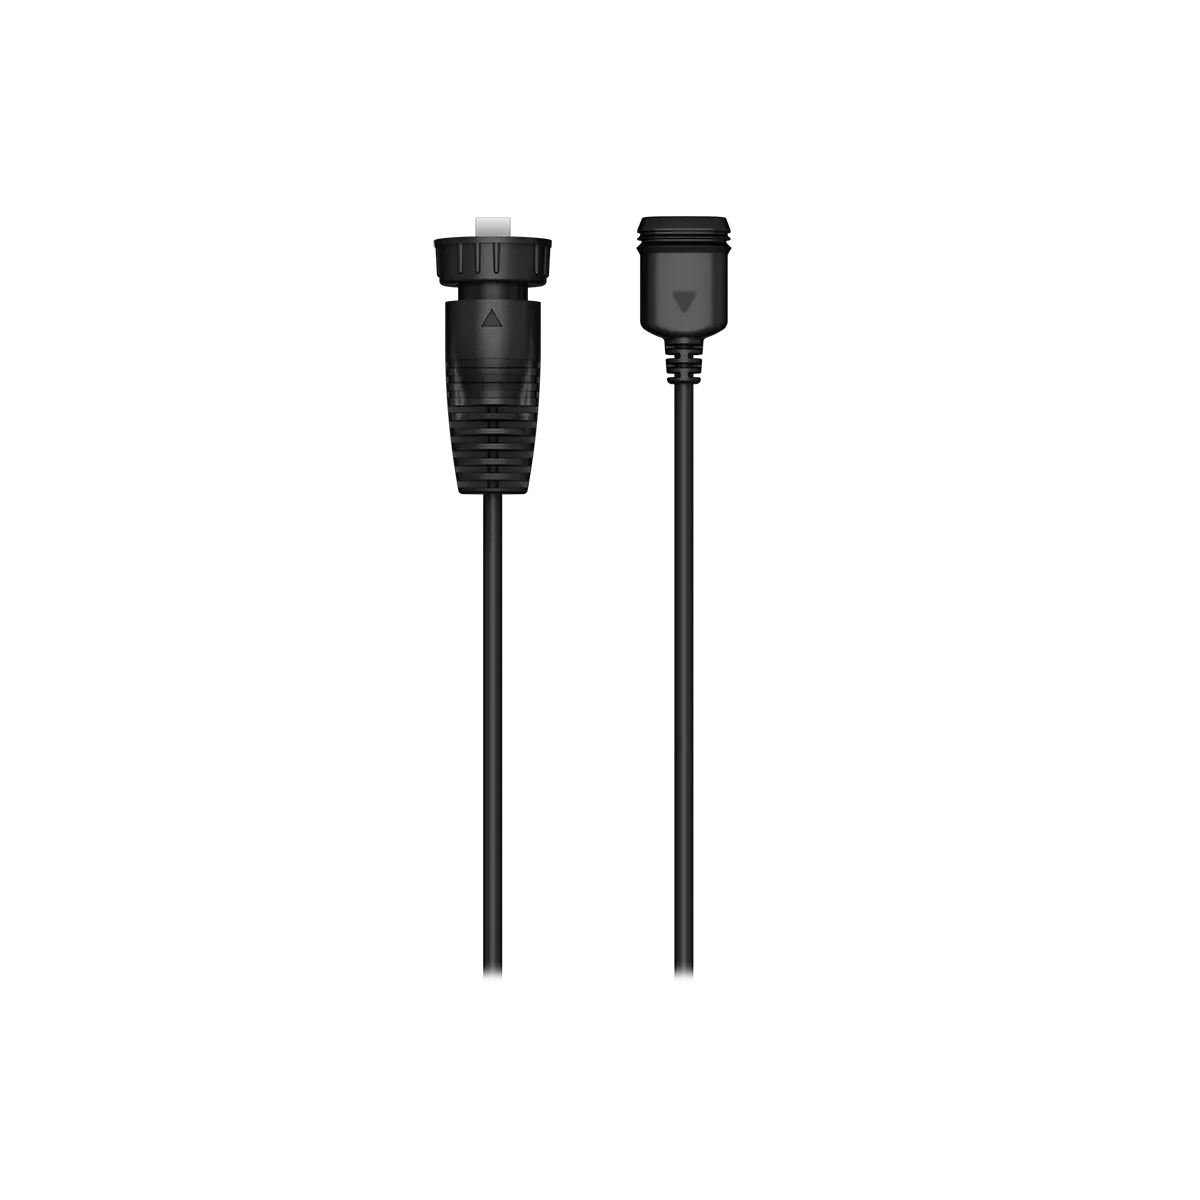 Garmin USB-C to USB-A Female Adapter Cable